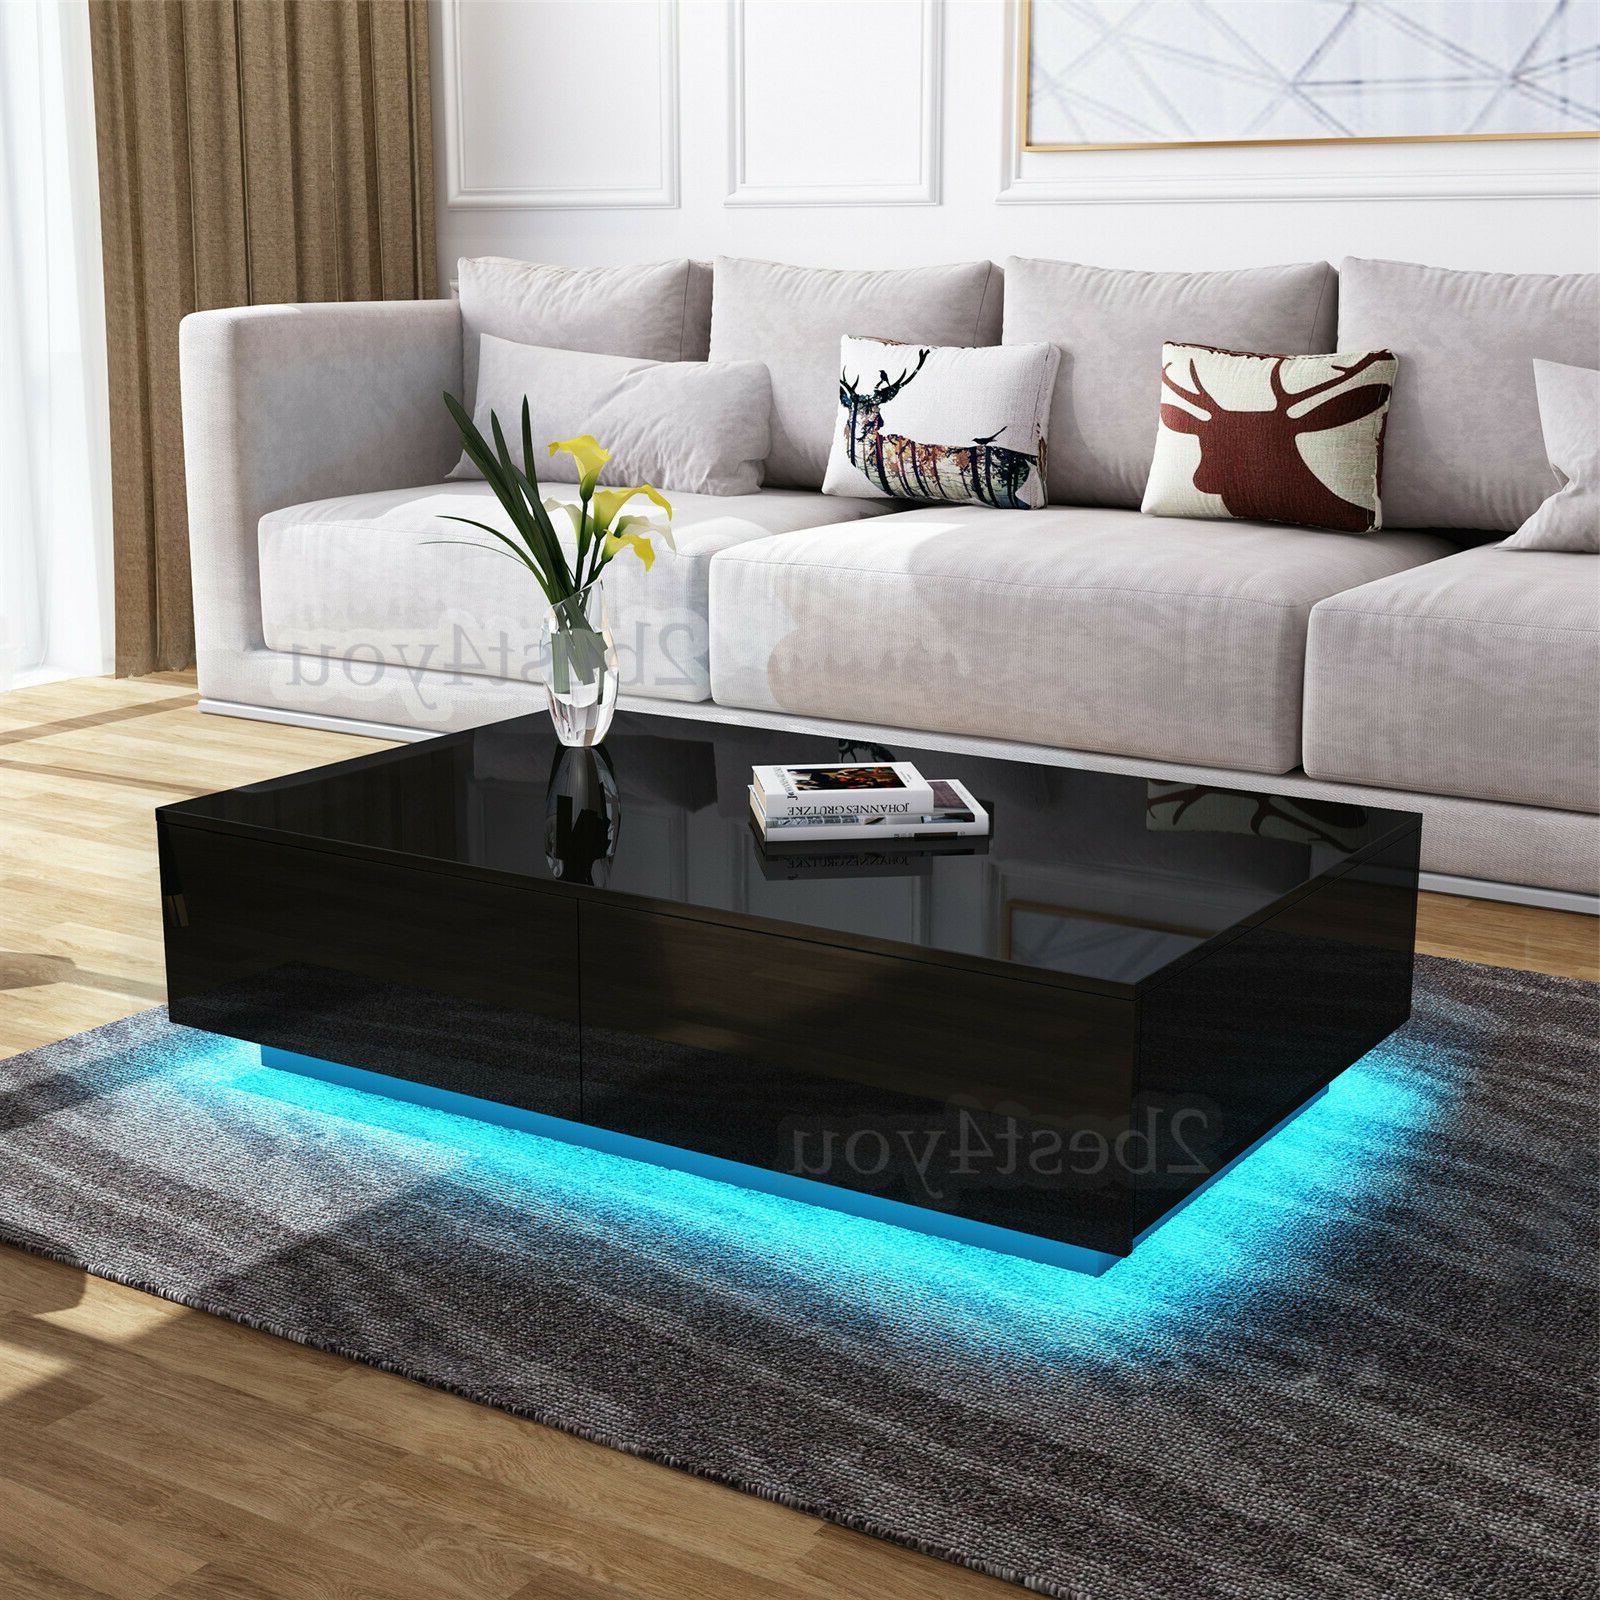 2020 Modern Coffee Table With Led Lights – Stellabracy With Coffee Tables With Drawers And Led Lights (Photo 4 of 15)